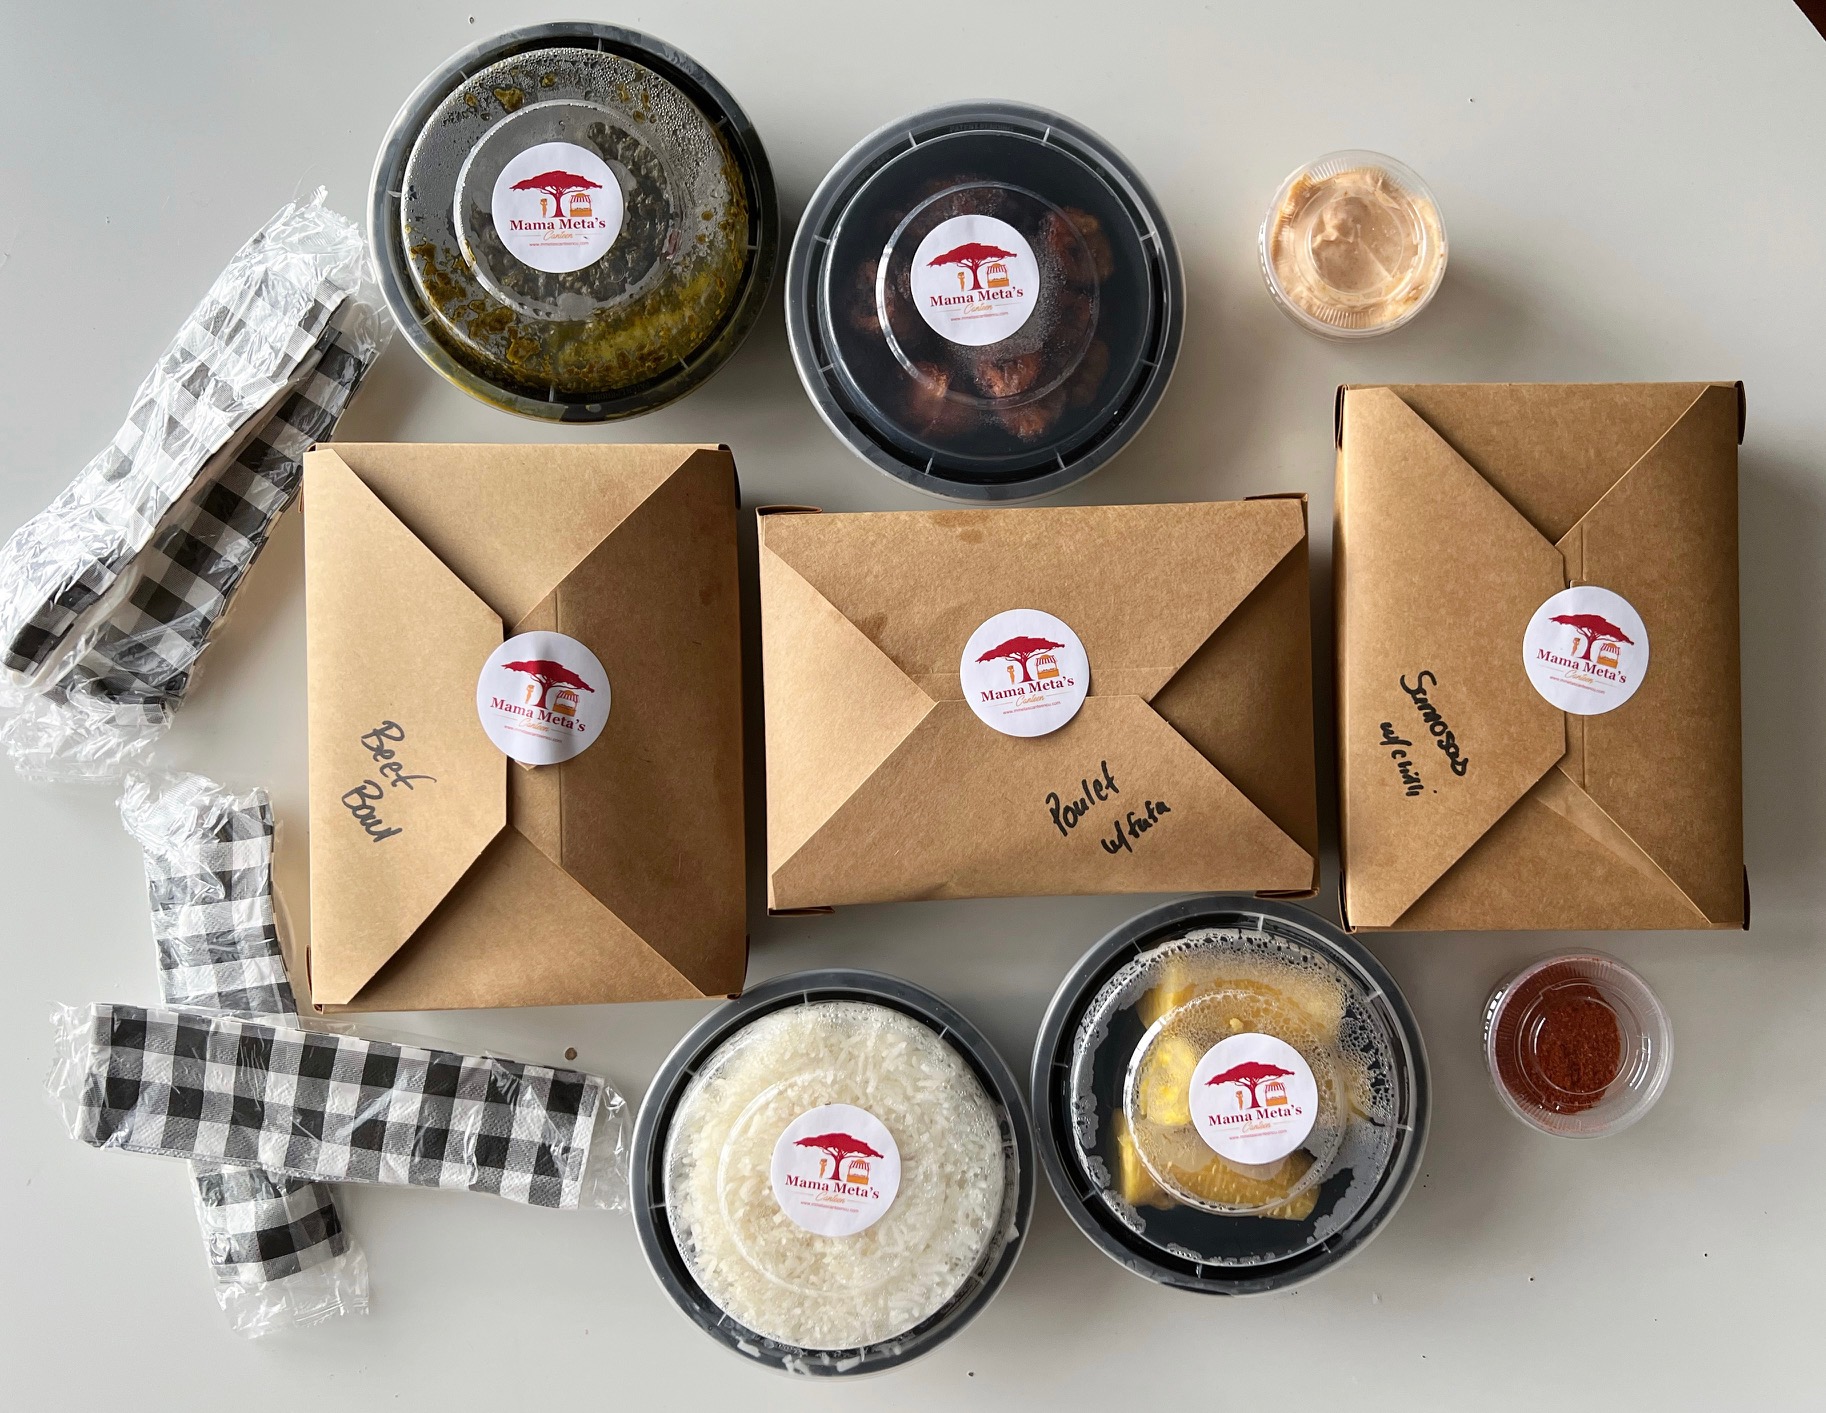 On a white table, the author's lunch order is spread out in cardboard rectangle boxes and circular plastic containers. Photo by Alyssa Buckley.